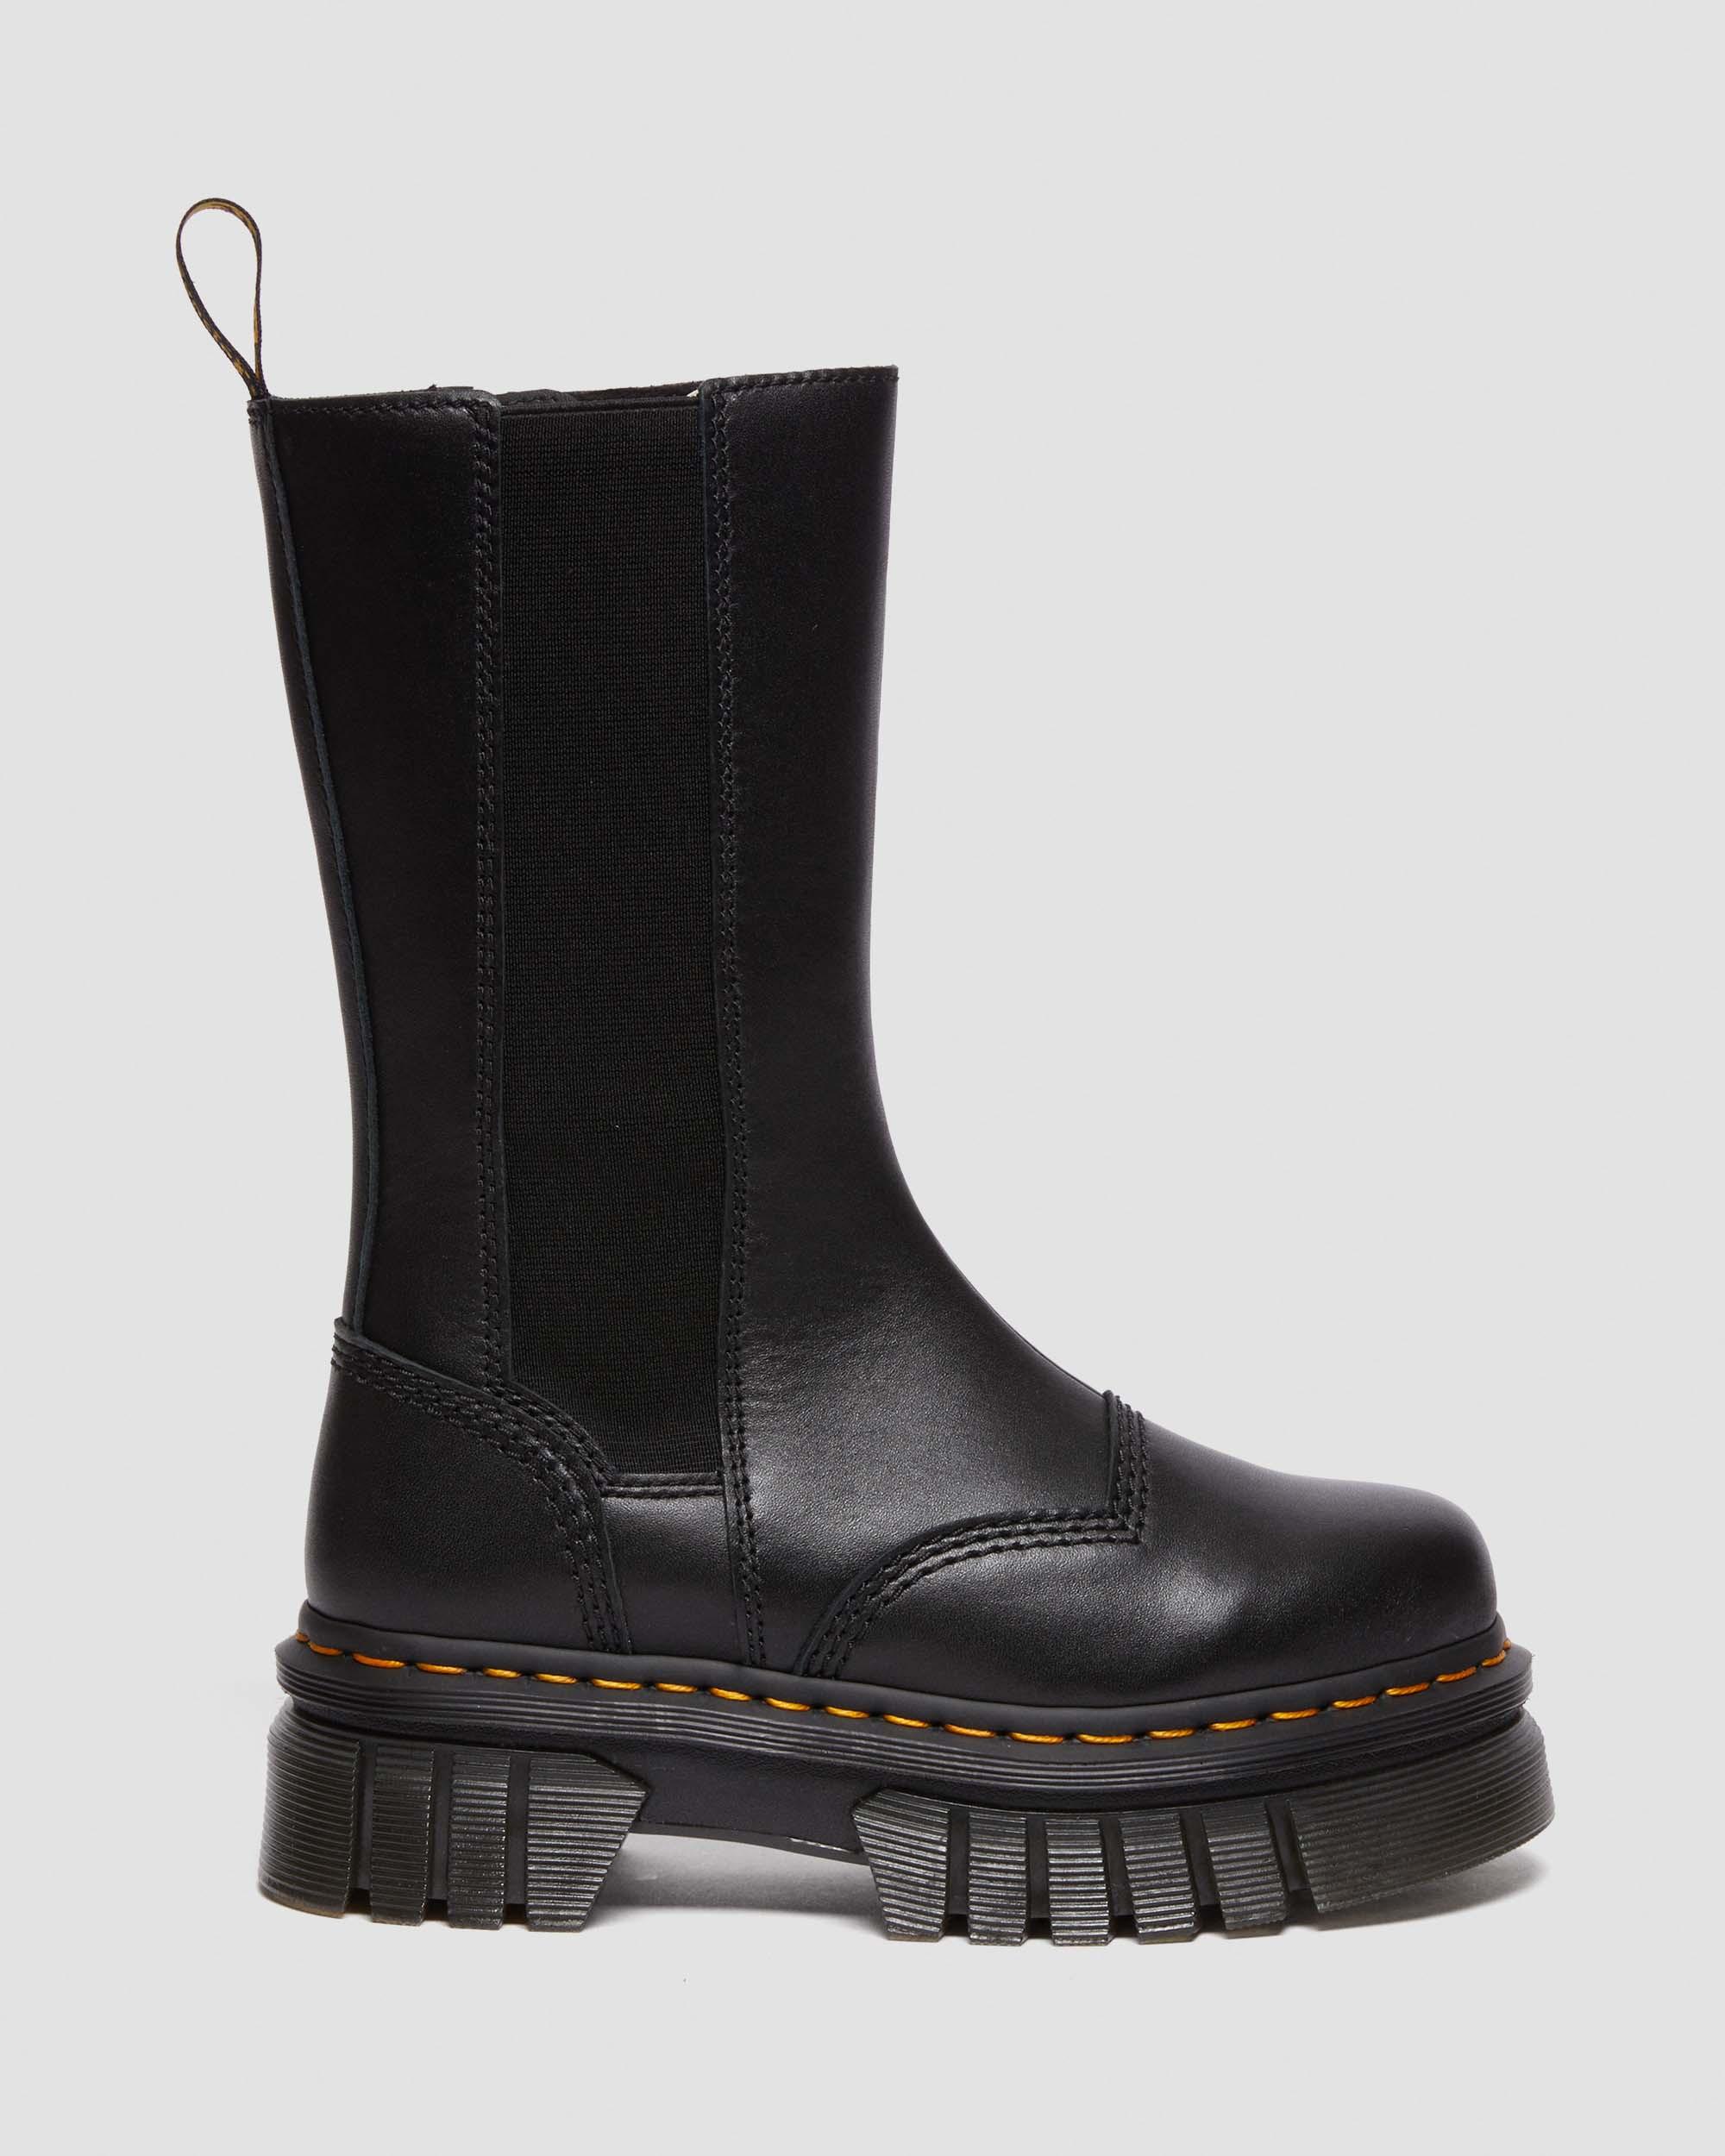 Audrick Tall Nappa Leather Platform Chelsea Boots in Black | Dr. Martens